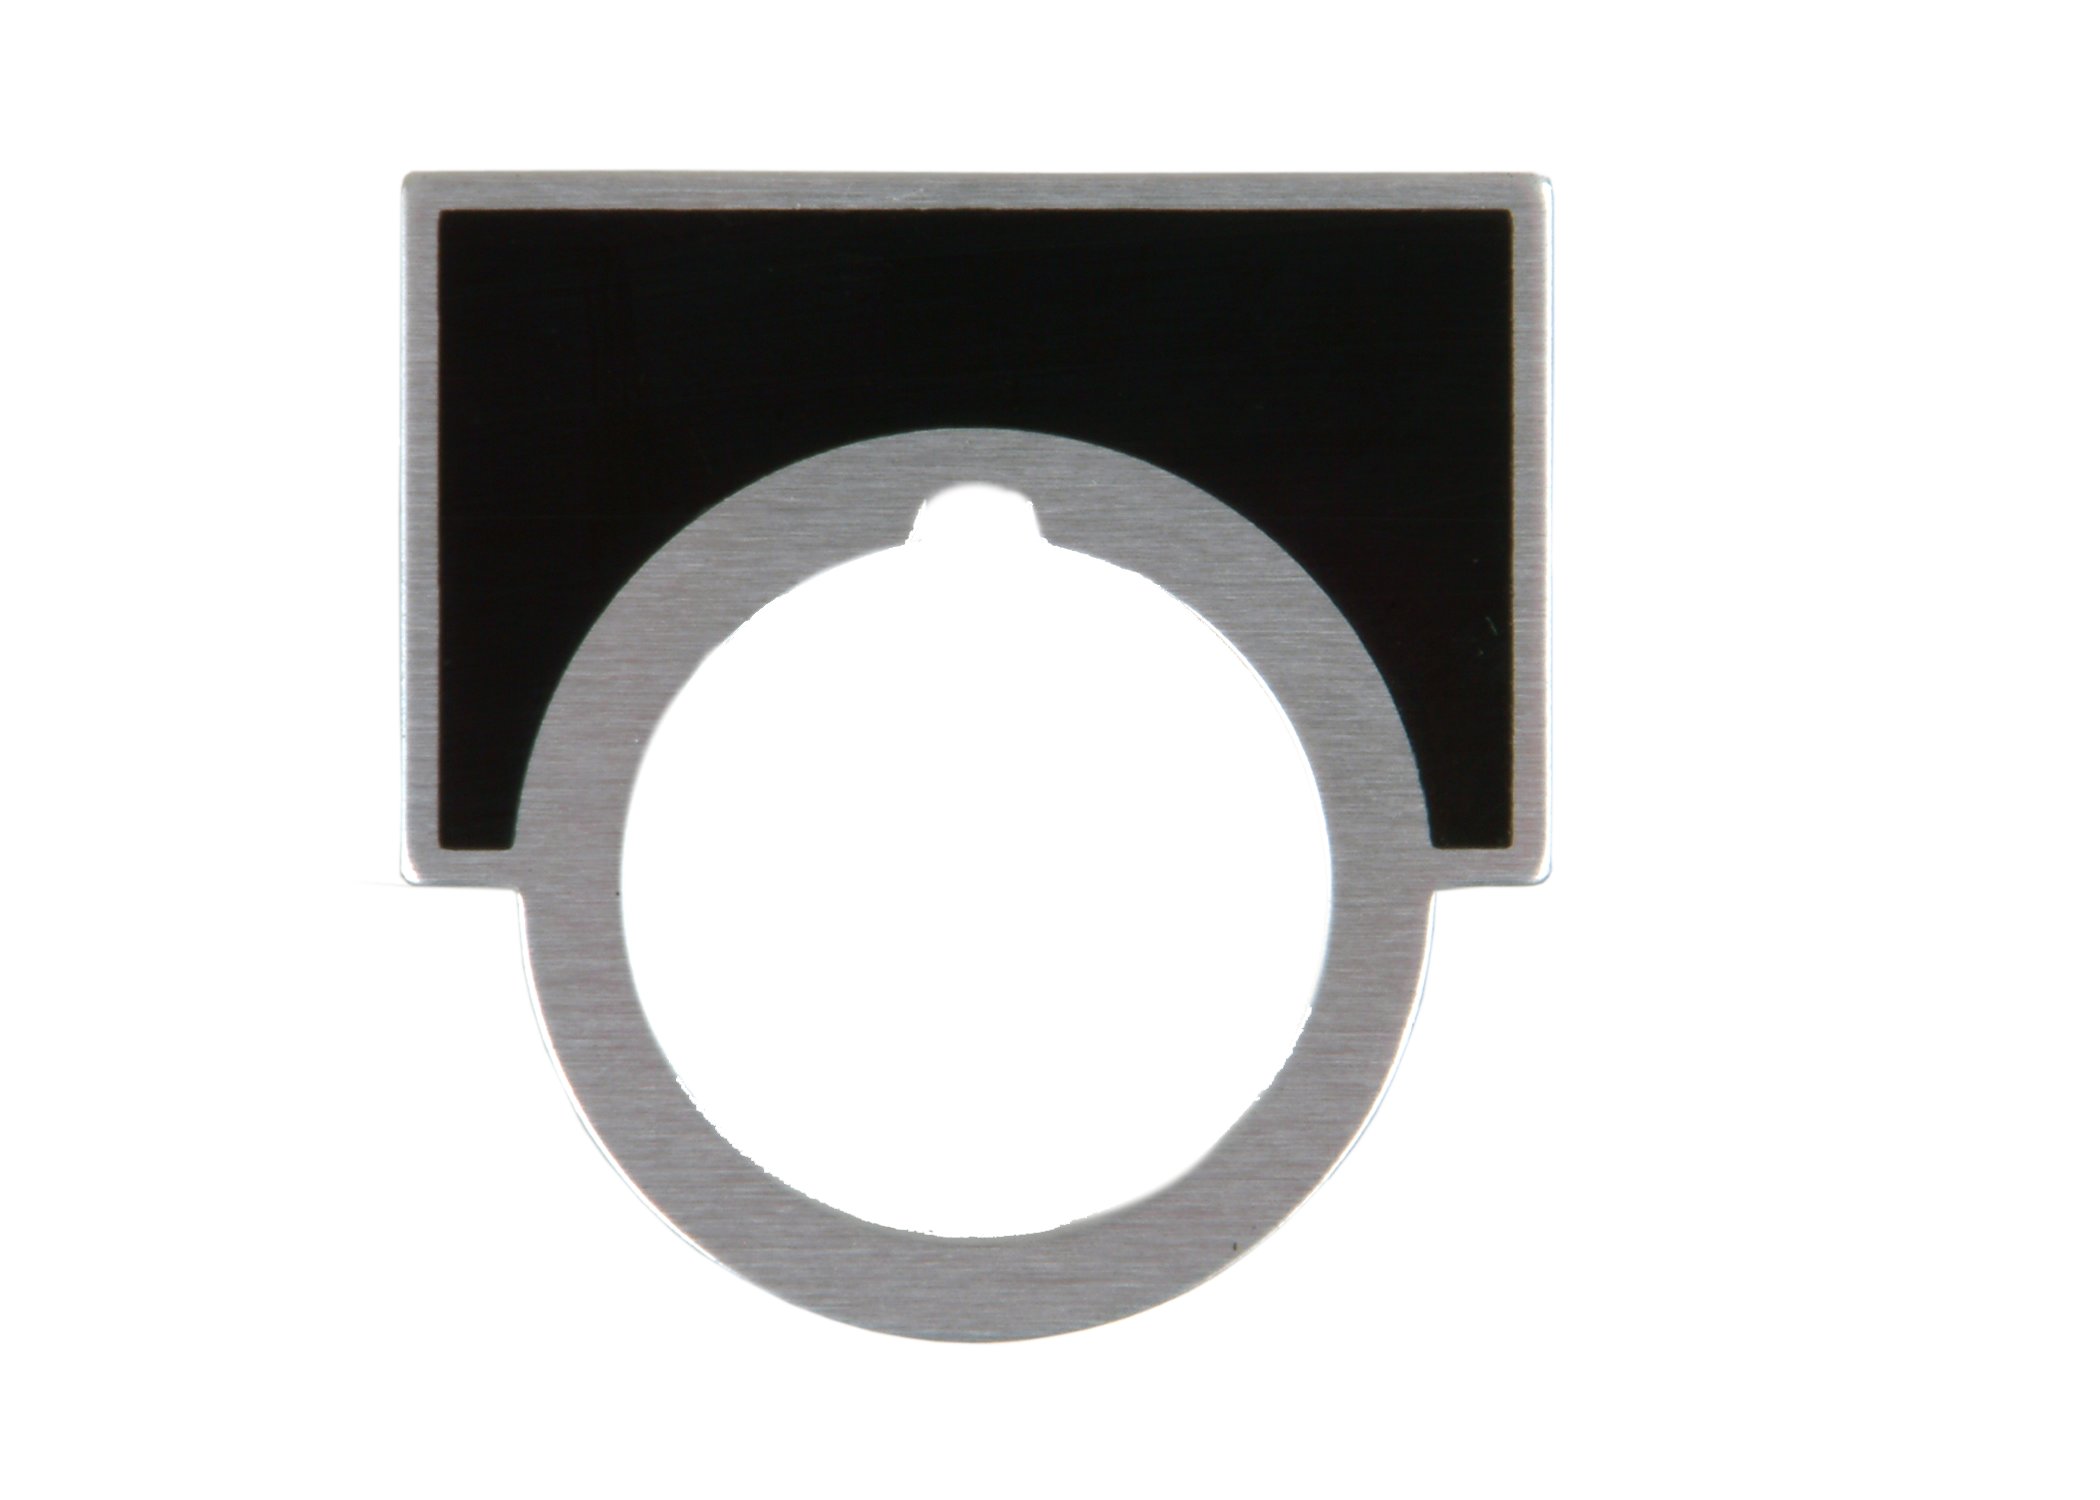 Accessory for Class 51 ( & ) 52 Legend Plate, Black Aluminum Large (1 1/4 x 2 )Blank Plate - No Text